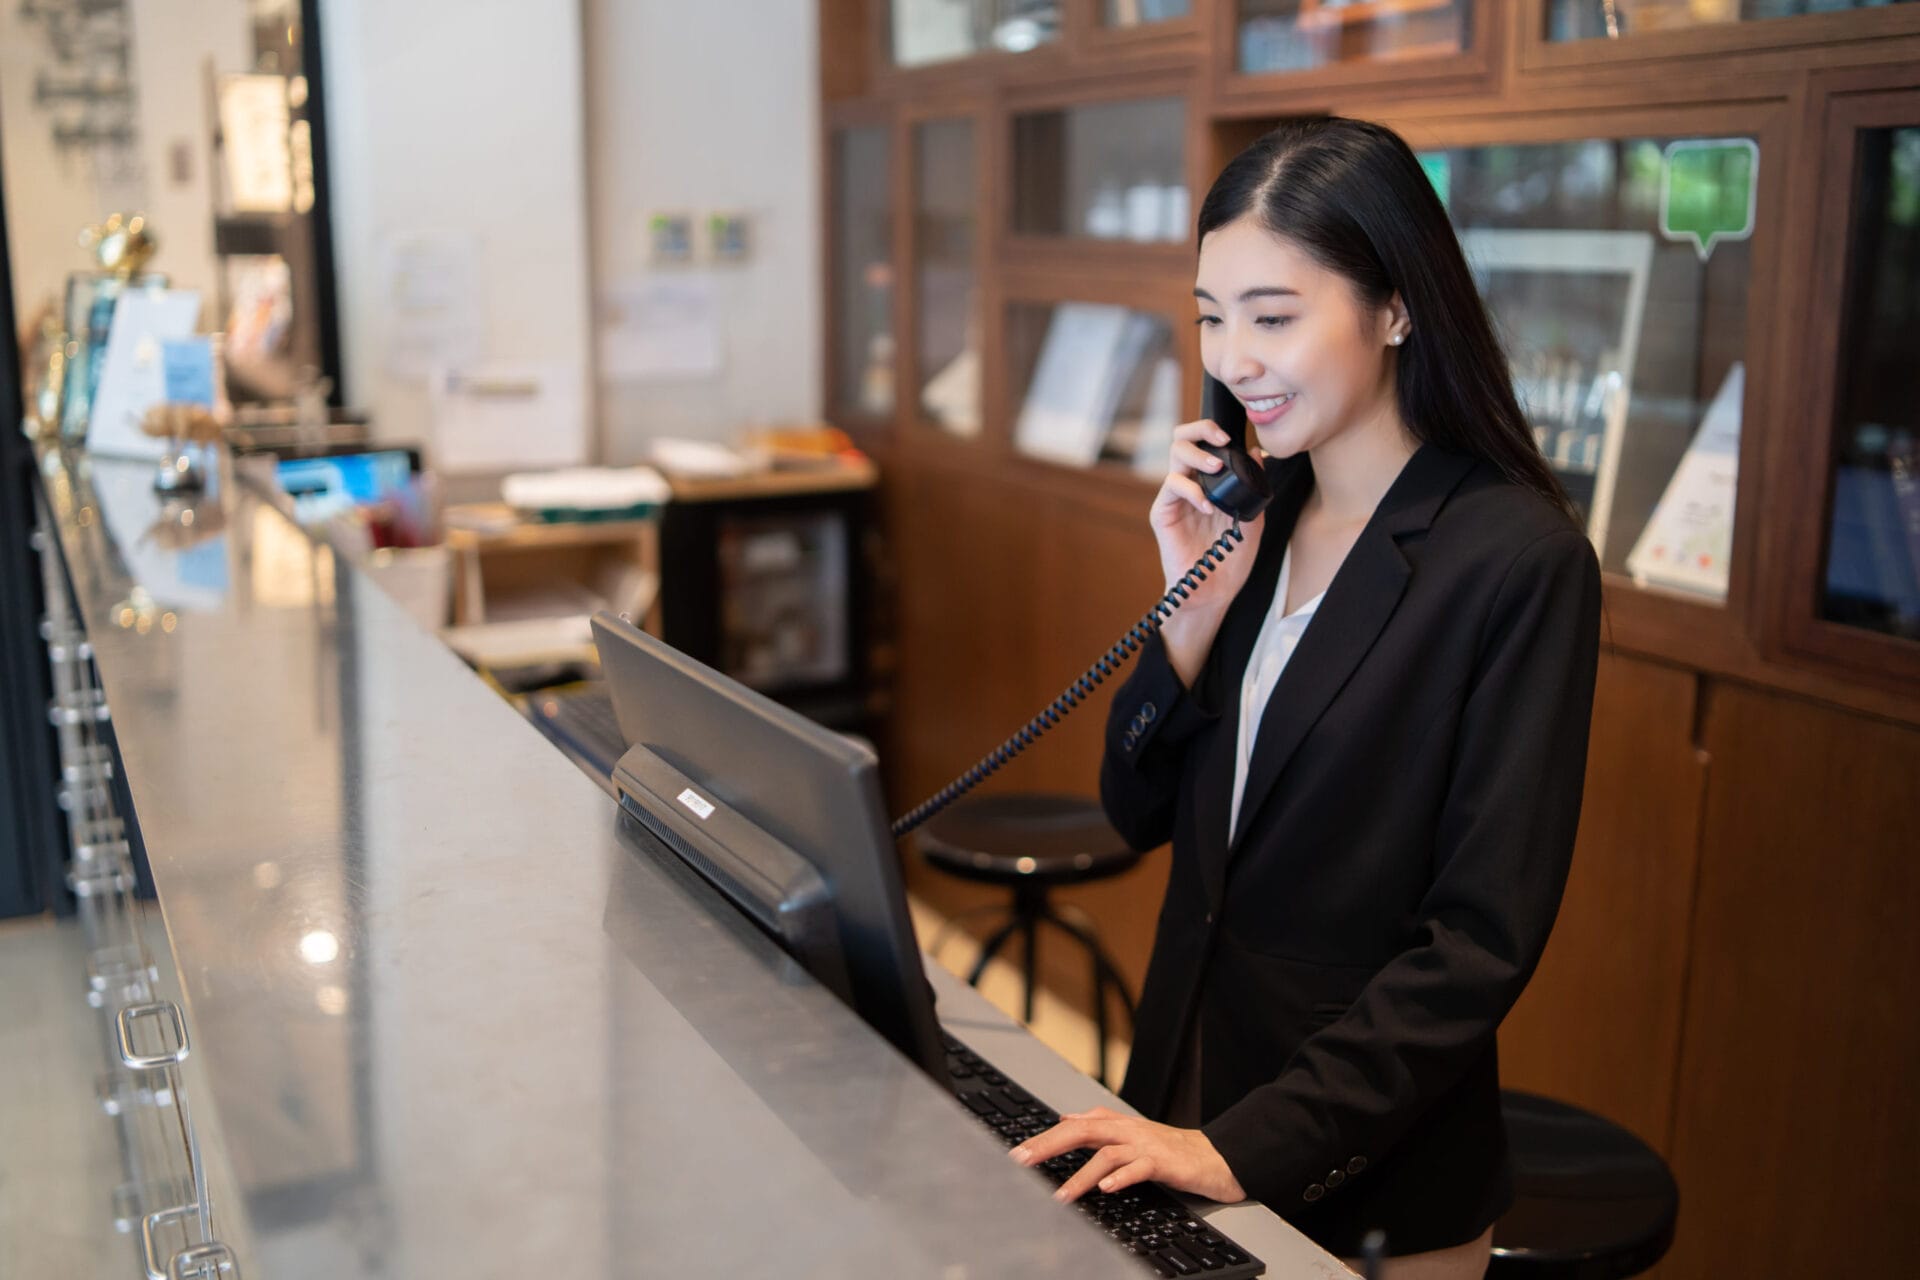 A hotel receptionist at the front desk on the phone